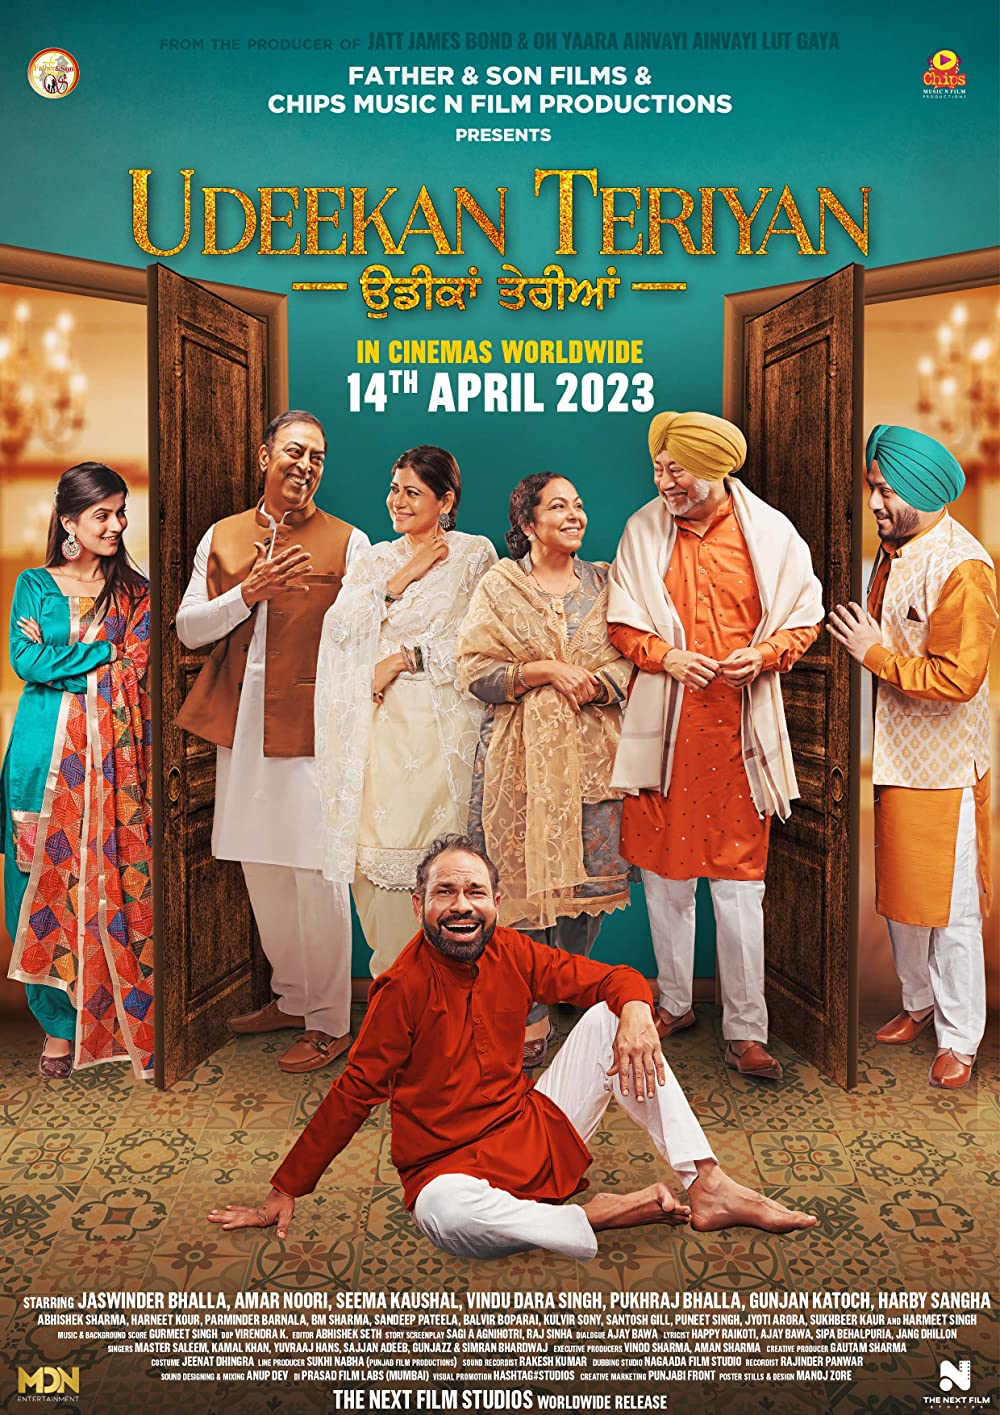 Udeekan Teriyan Movie (2023) Cast, Release Date, Story, Budget, Collection, Poster, Trailer, Review